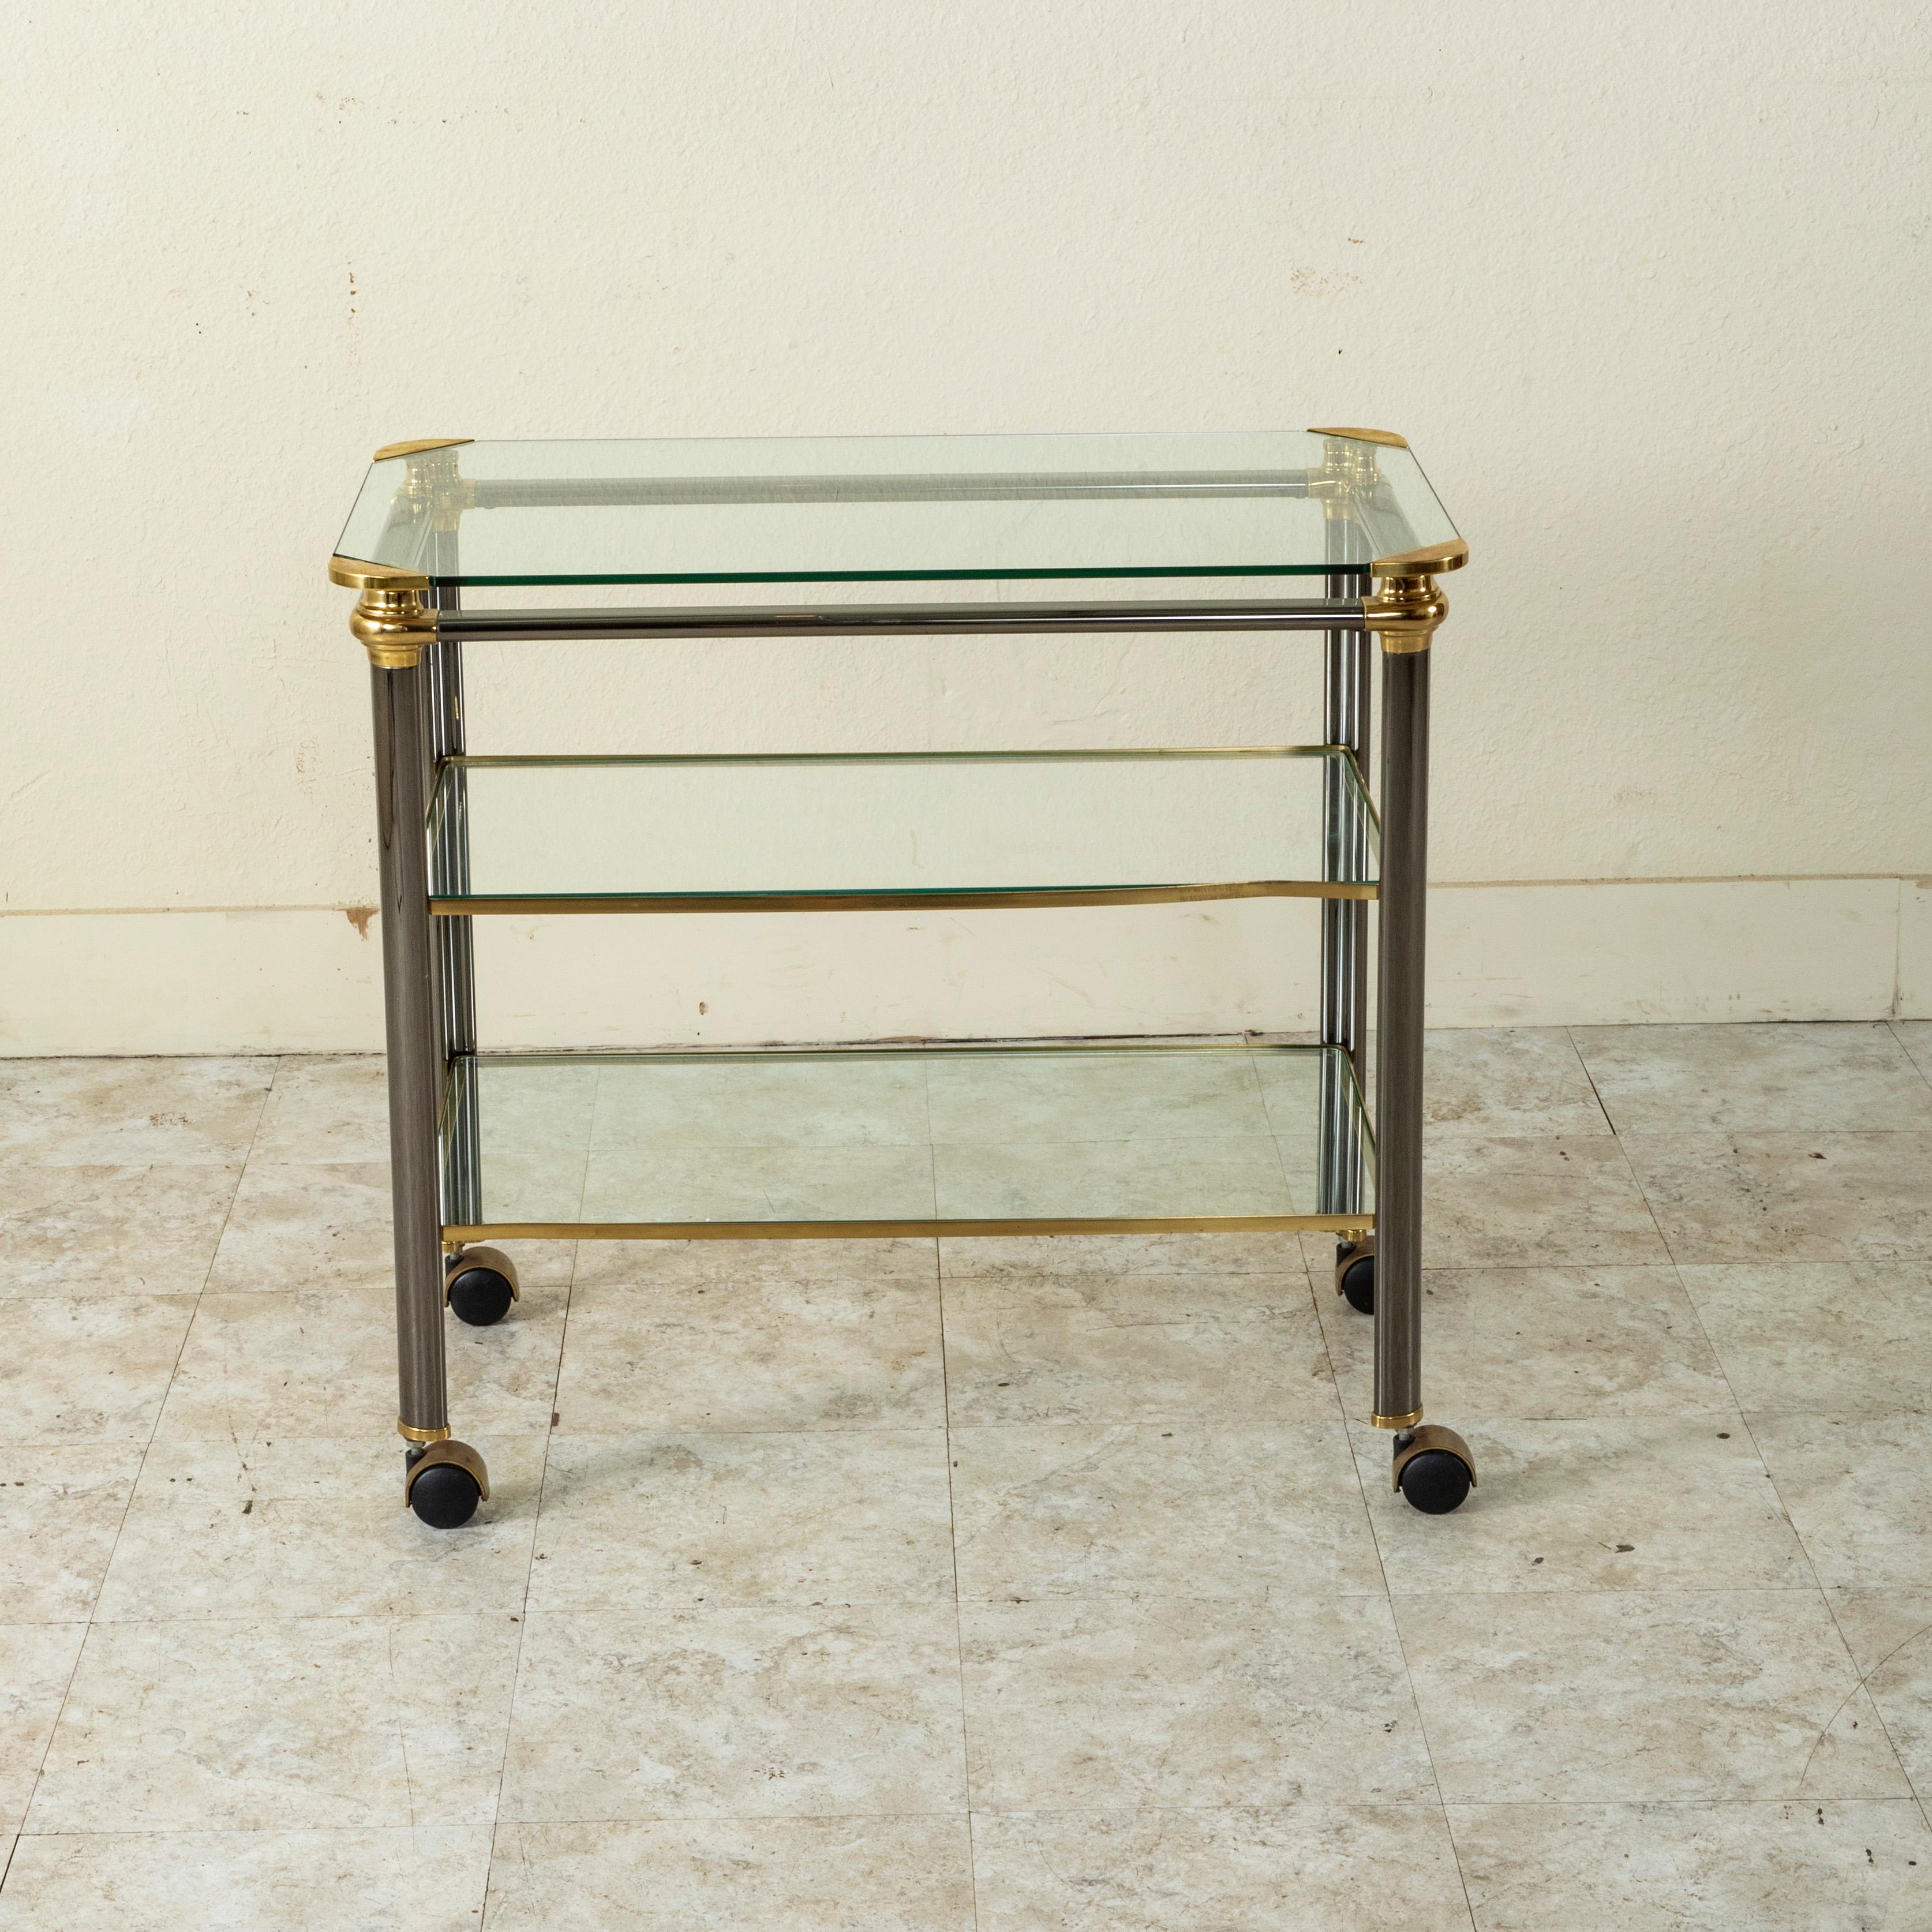 This mid-twentieth century French bar cart or trolley is designed with chrome legs and brass detailing. The bar cart rests on casters allowing for easy mobility. With three glass tiers, this piece provides layered display space for bar accessories